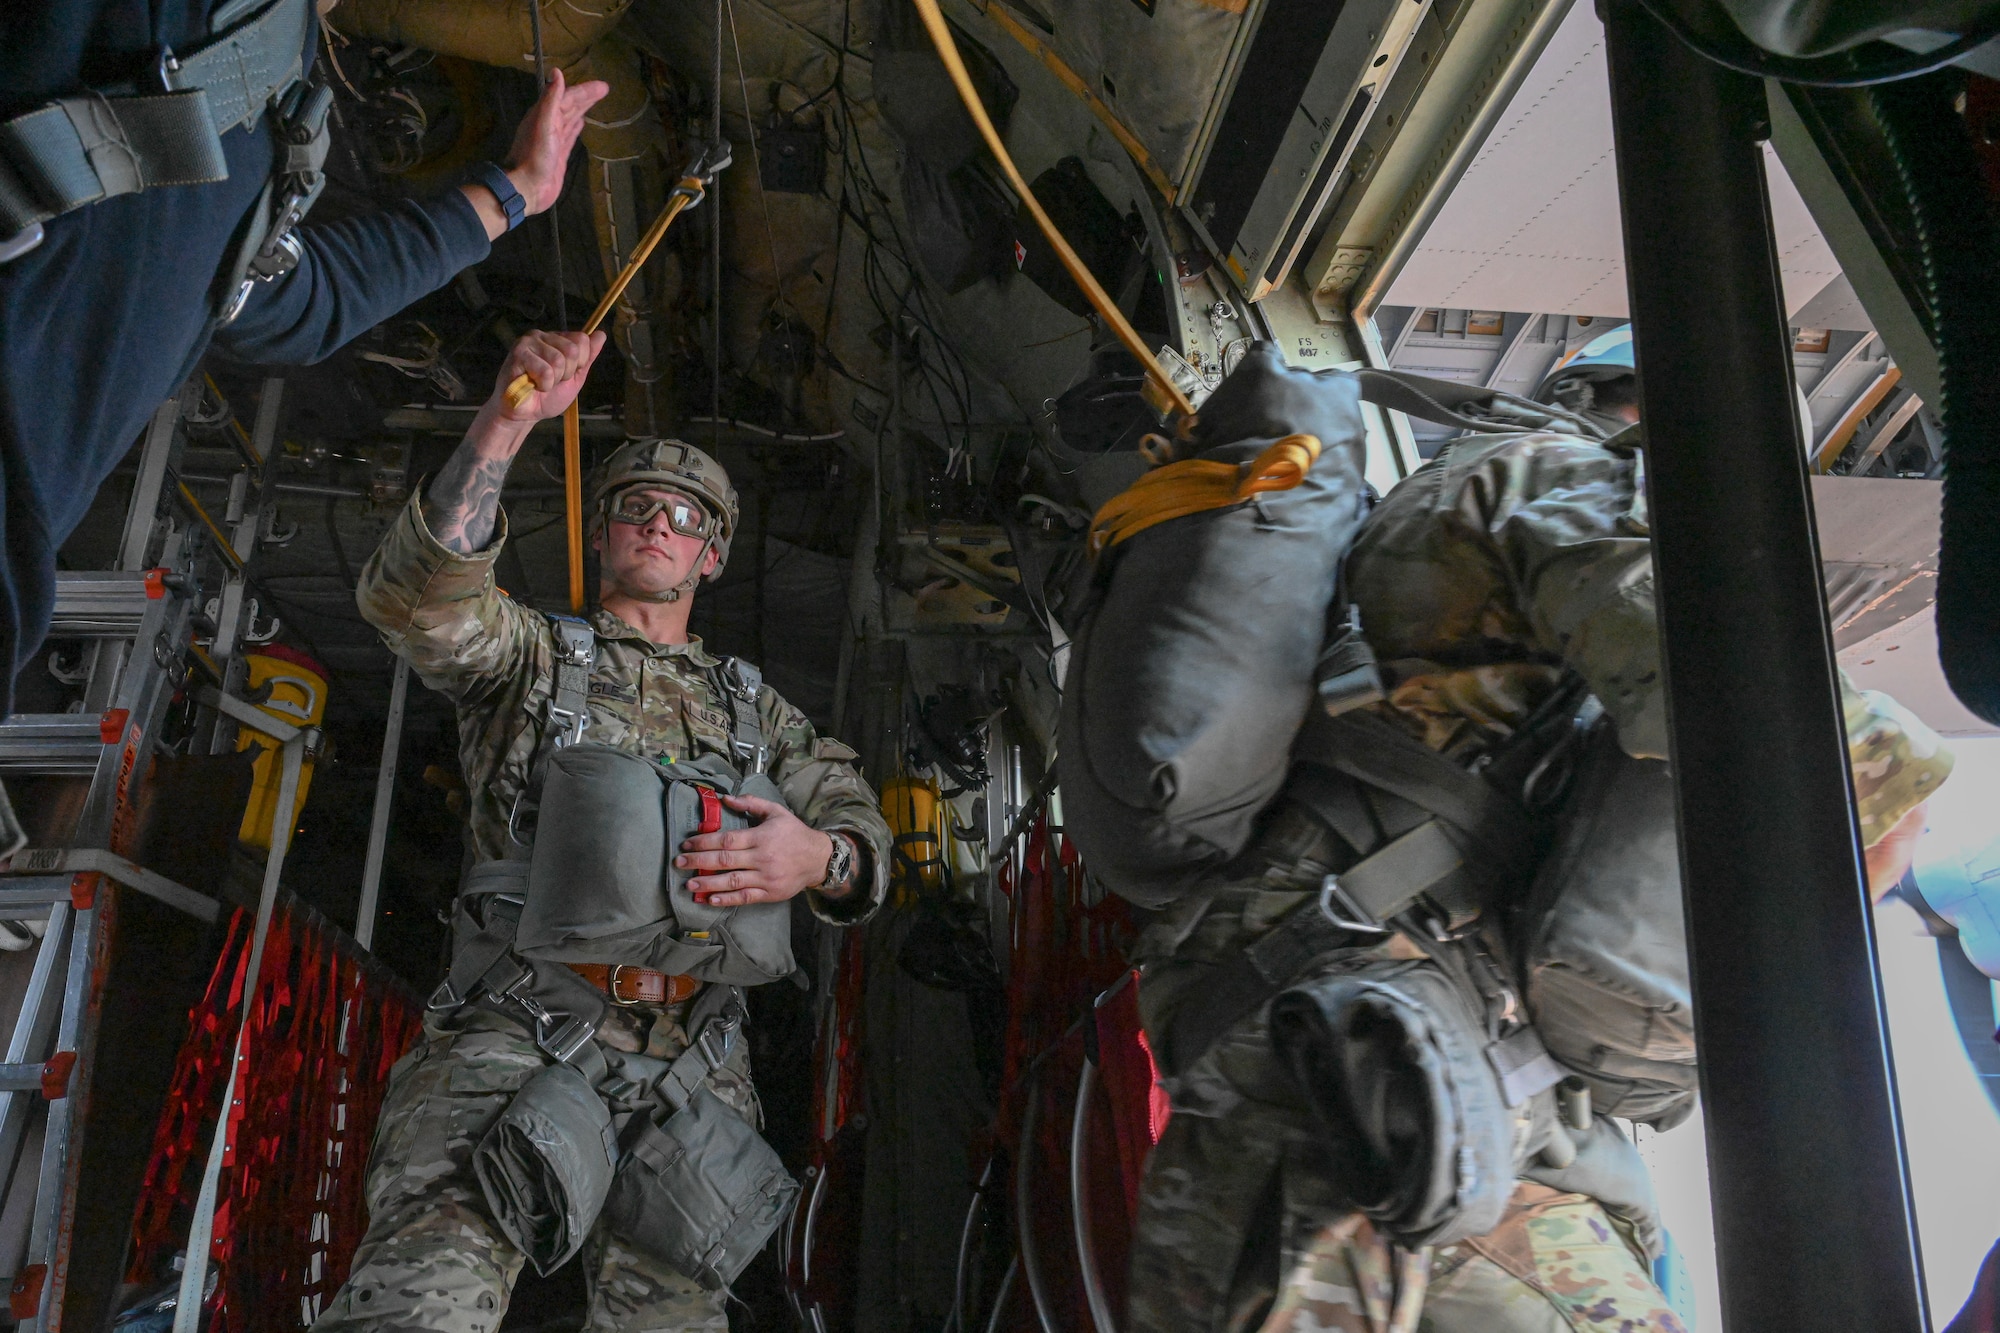 Paratroopers jump off a plane.